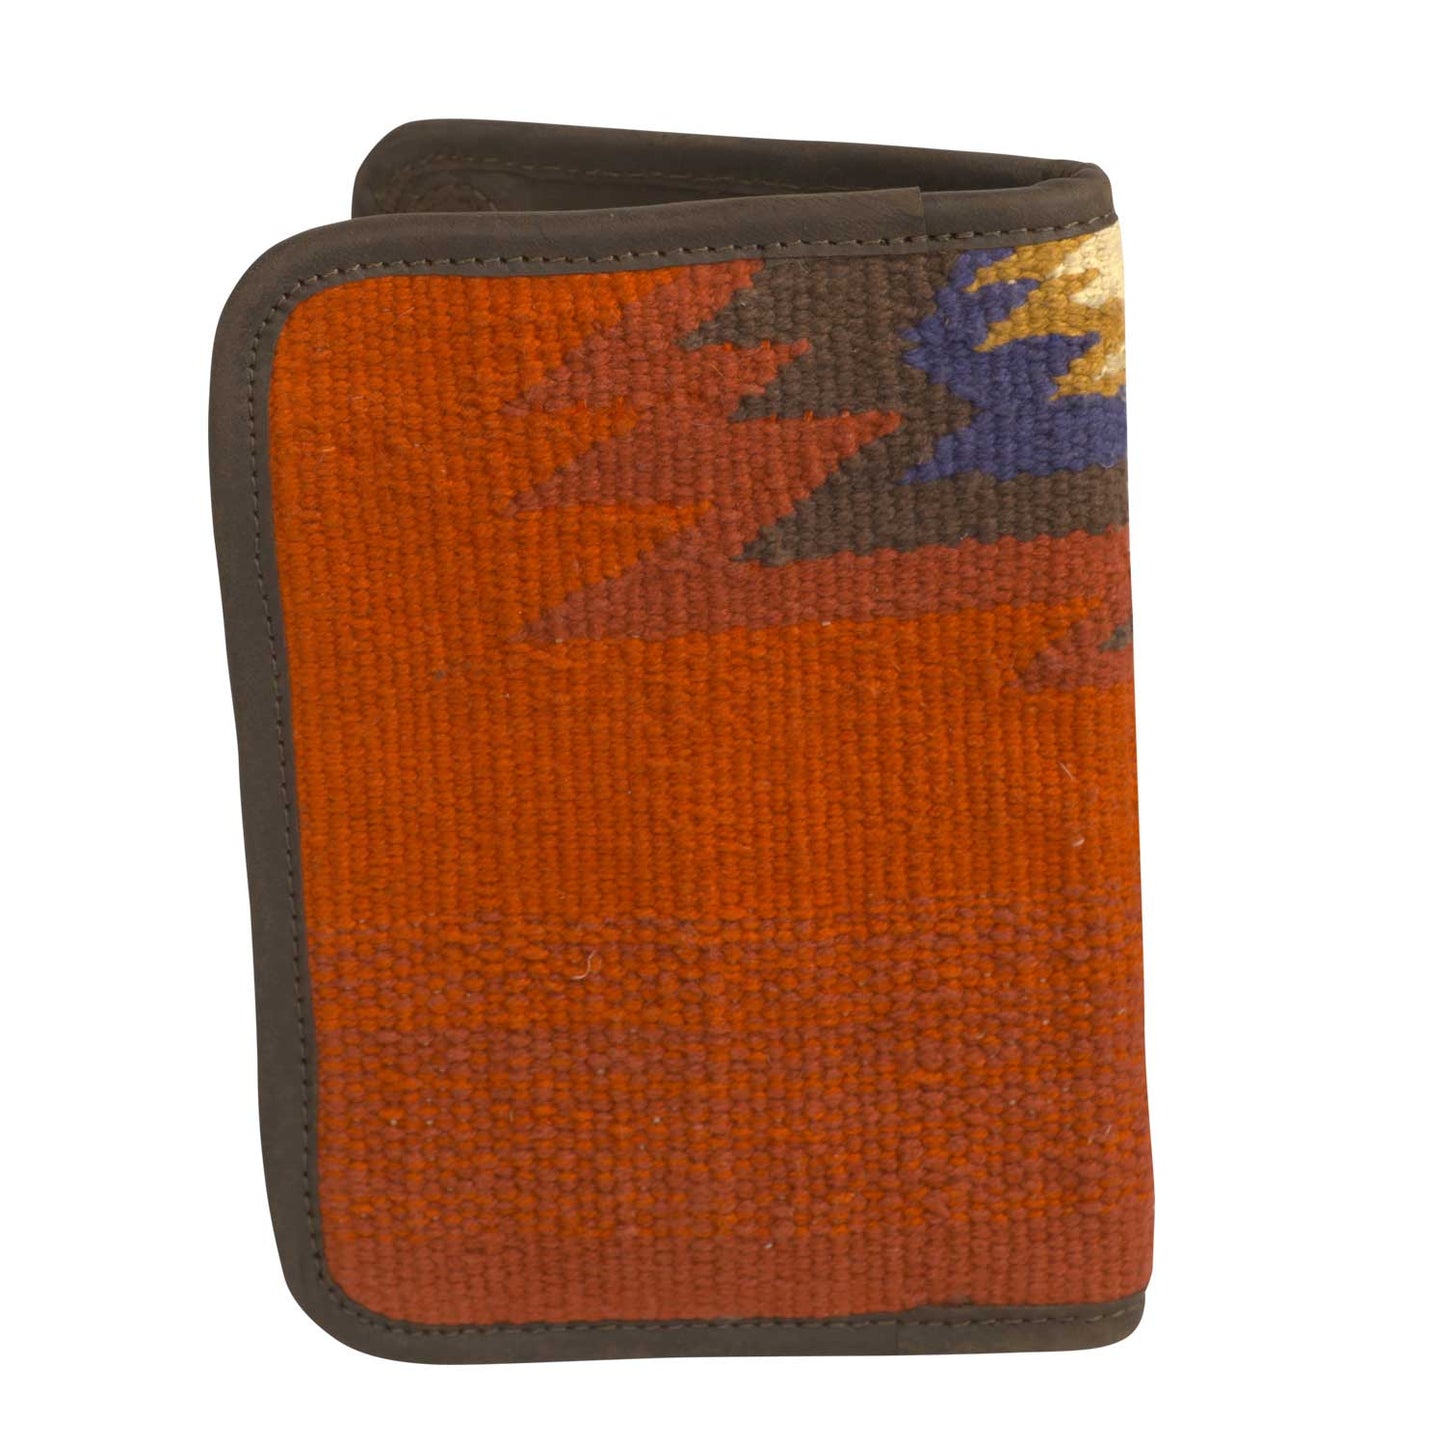 Crimson Sun Magnetic Wallet by STS Ranchwear